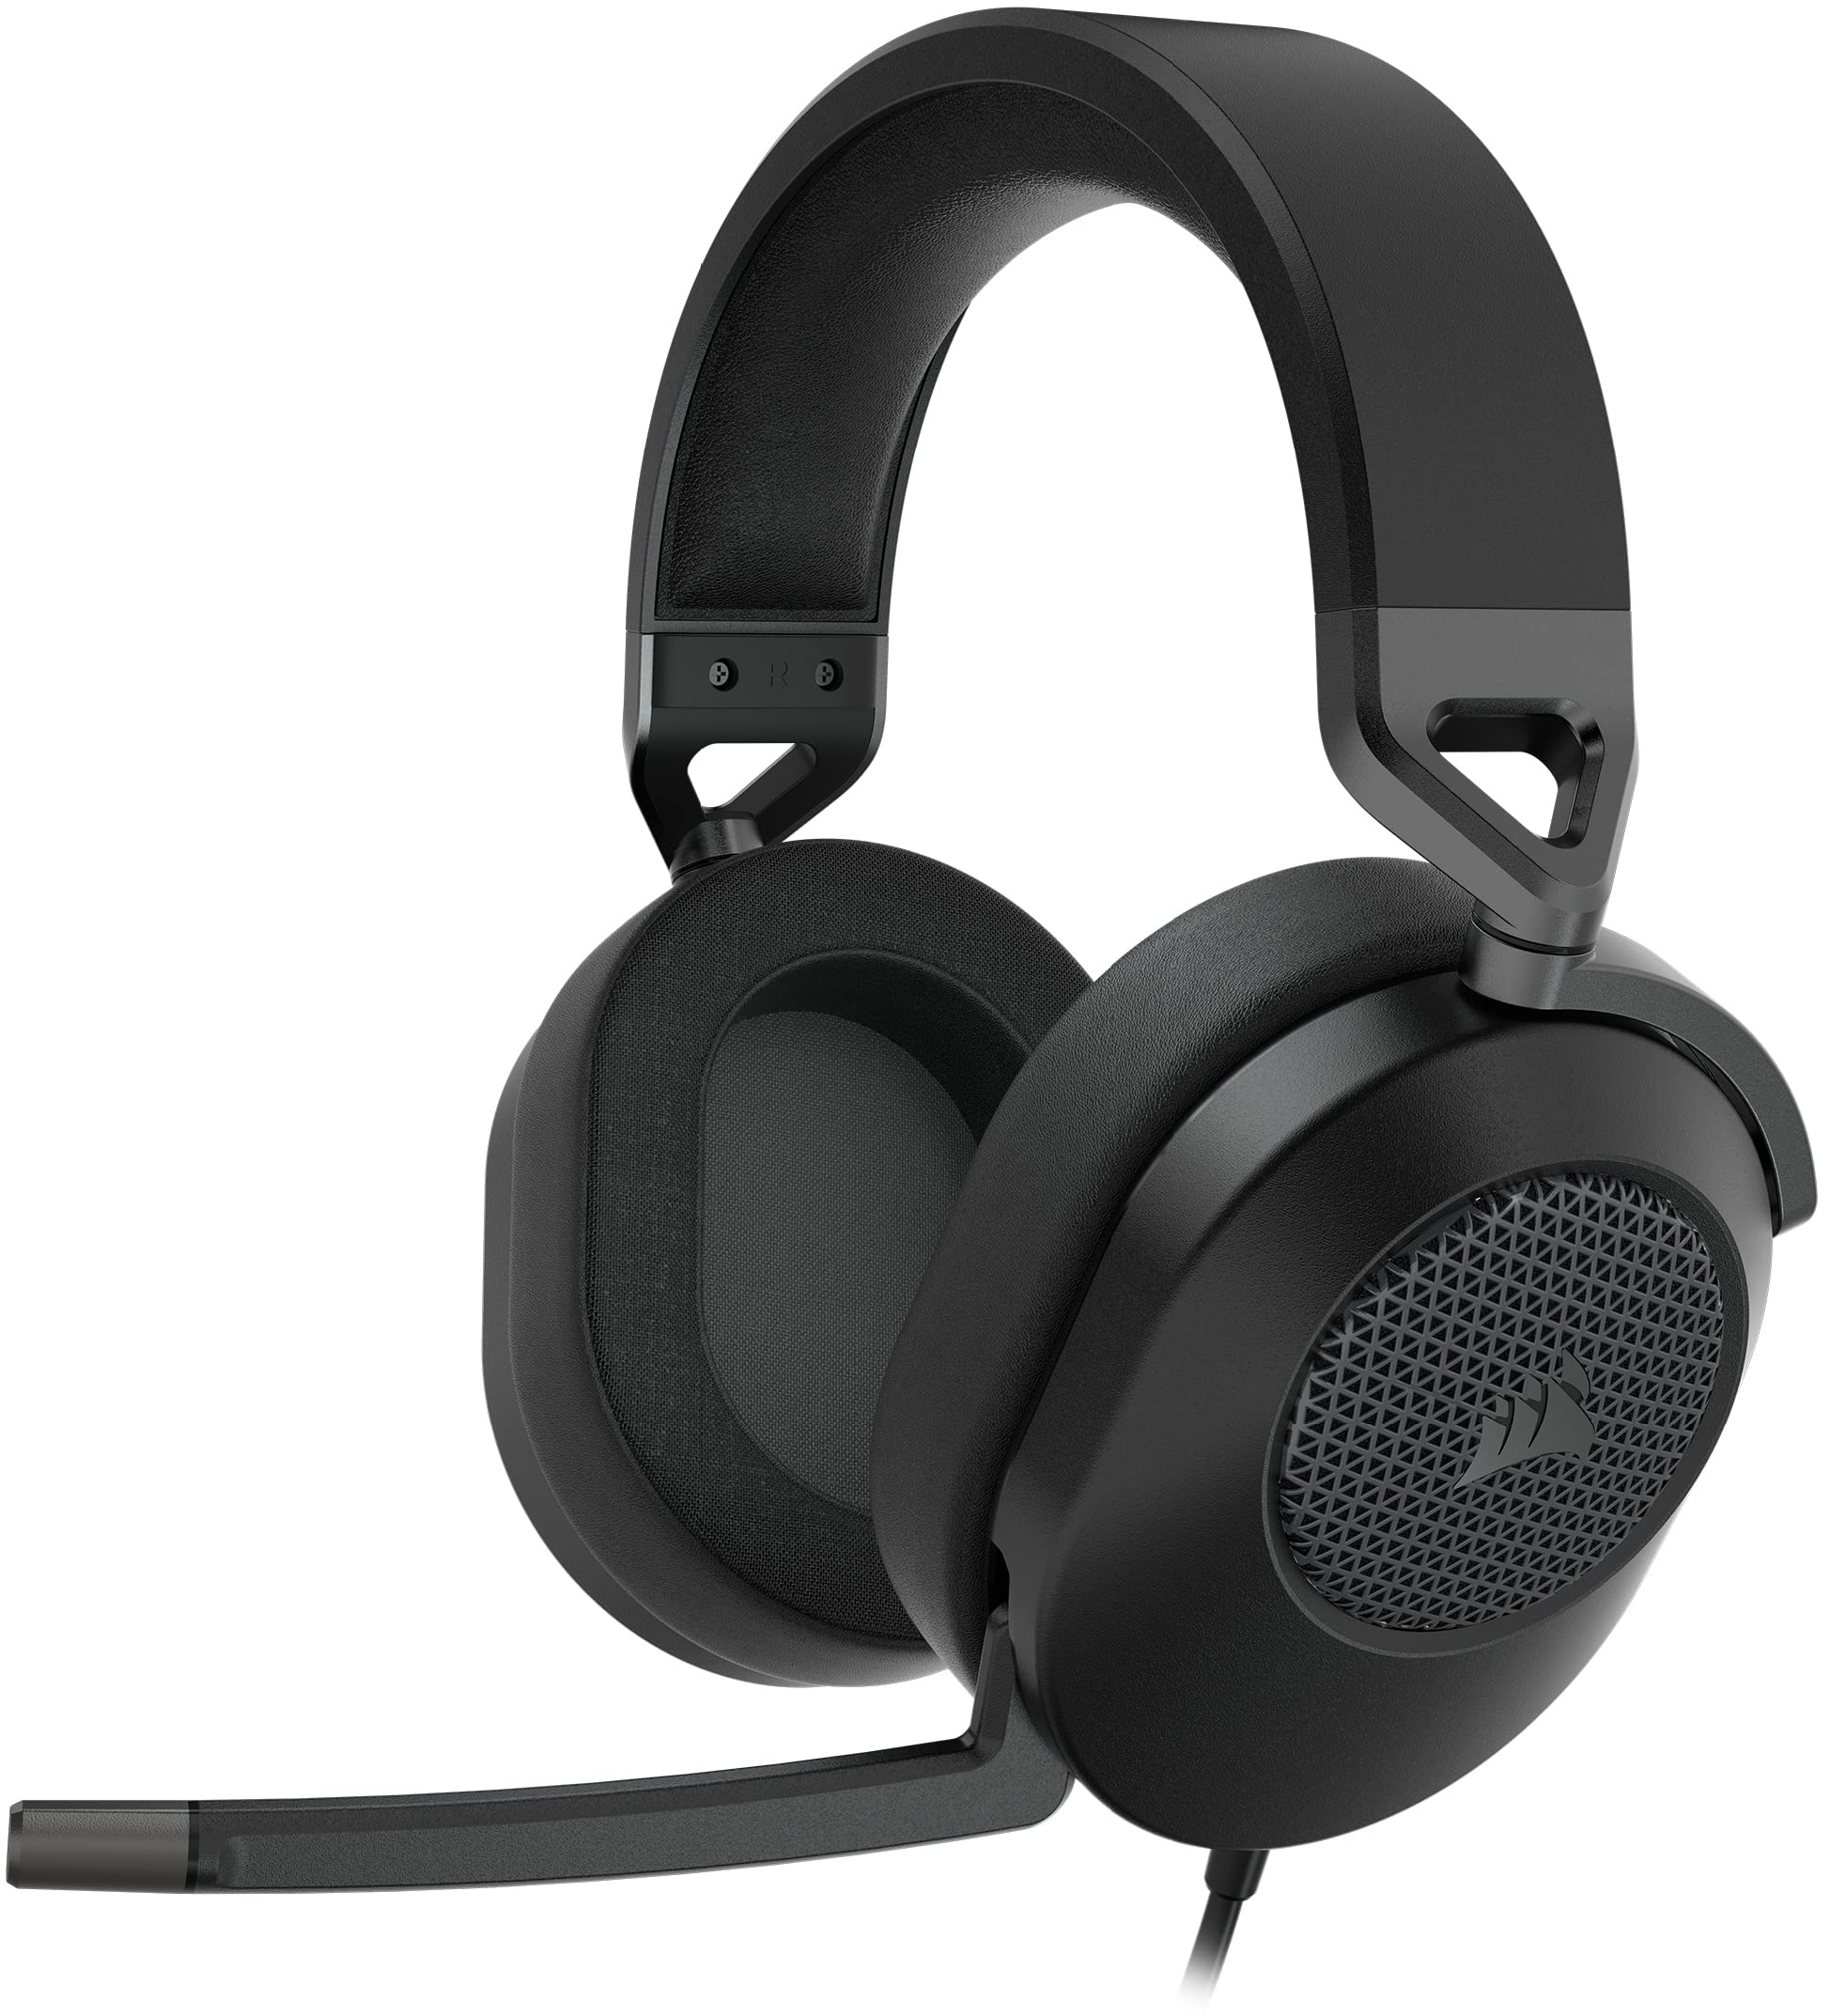 Corsair HS65 Wired 7.1 Surround Gaming Headset (Carbon) $38.65 + Free Shipping